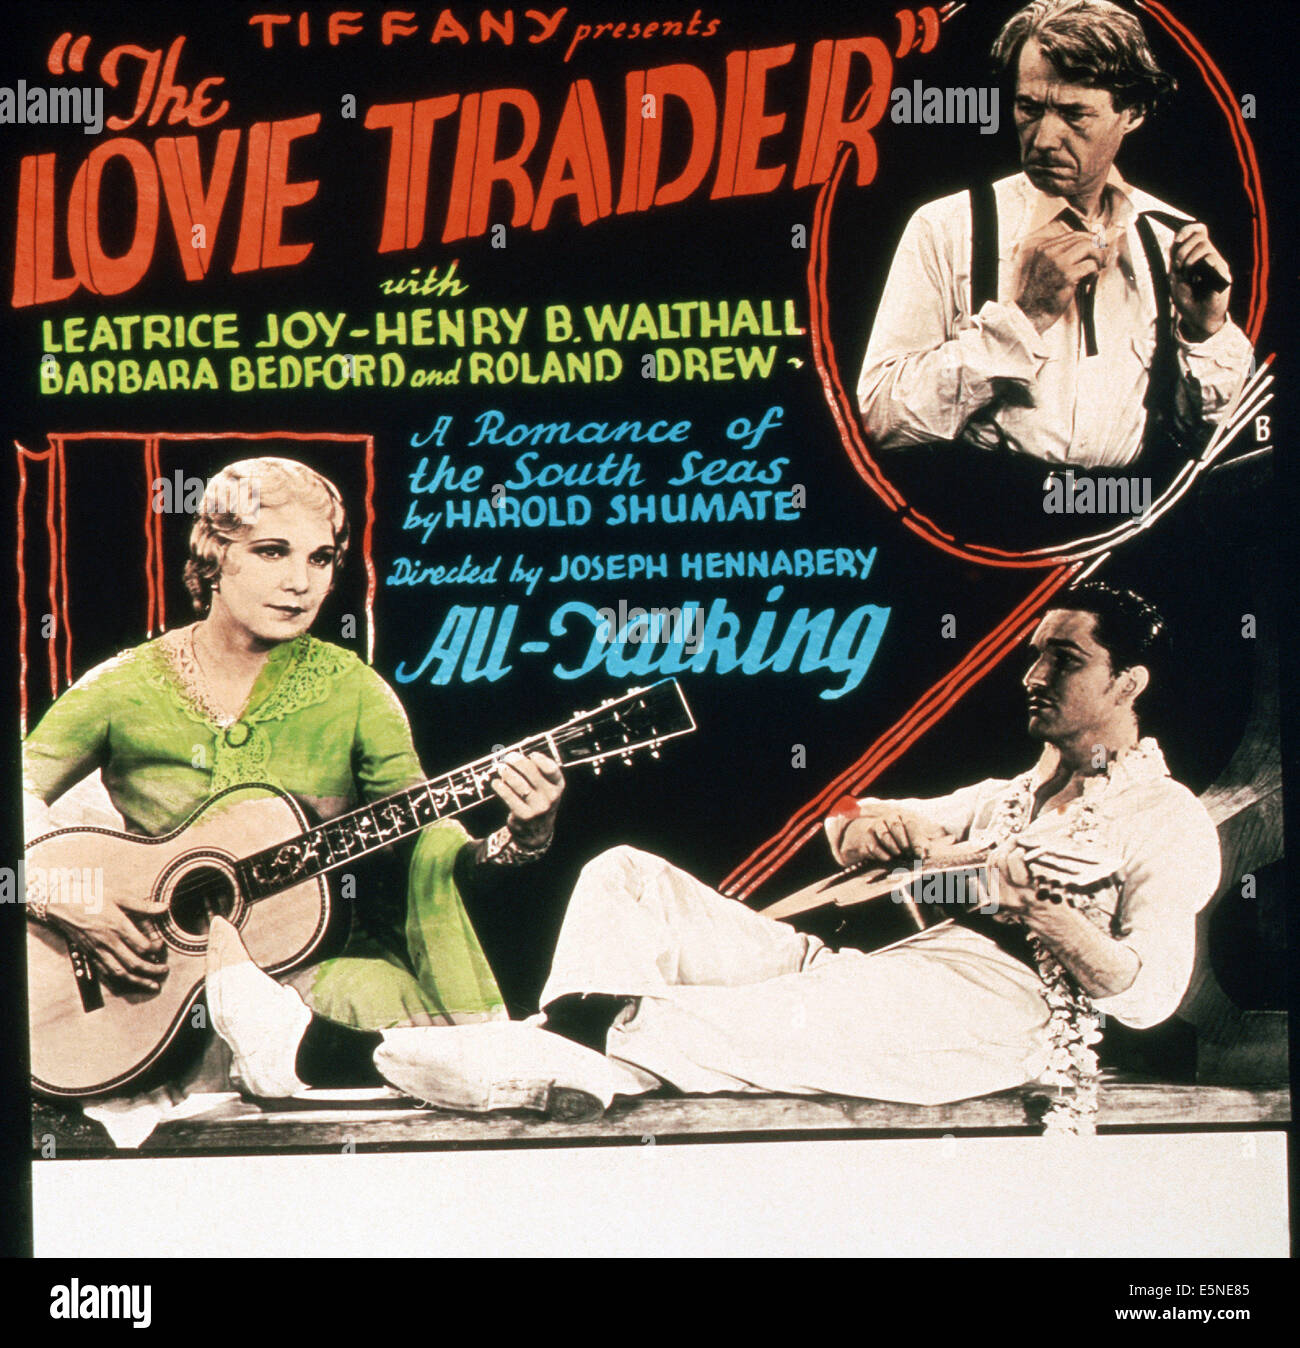 THE LOVE TRADER, Leatrice Joy (left), Henry B. Walthall (top right), Roland Drew (bottom right), 1930 Stock Photo